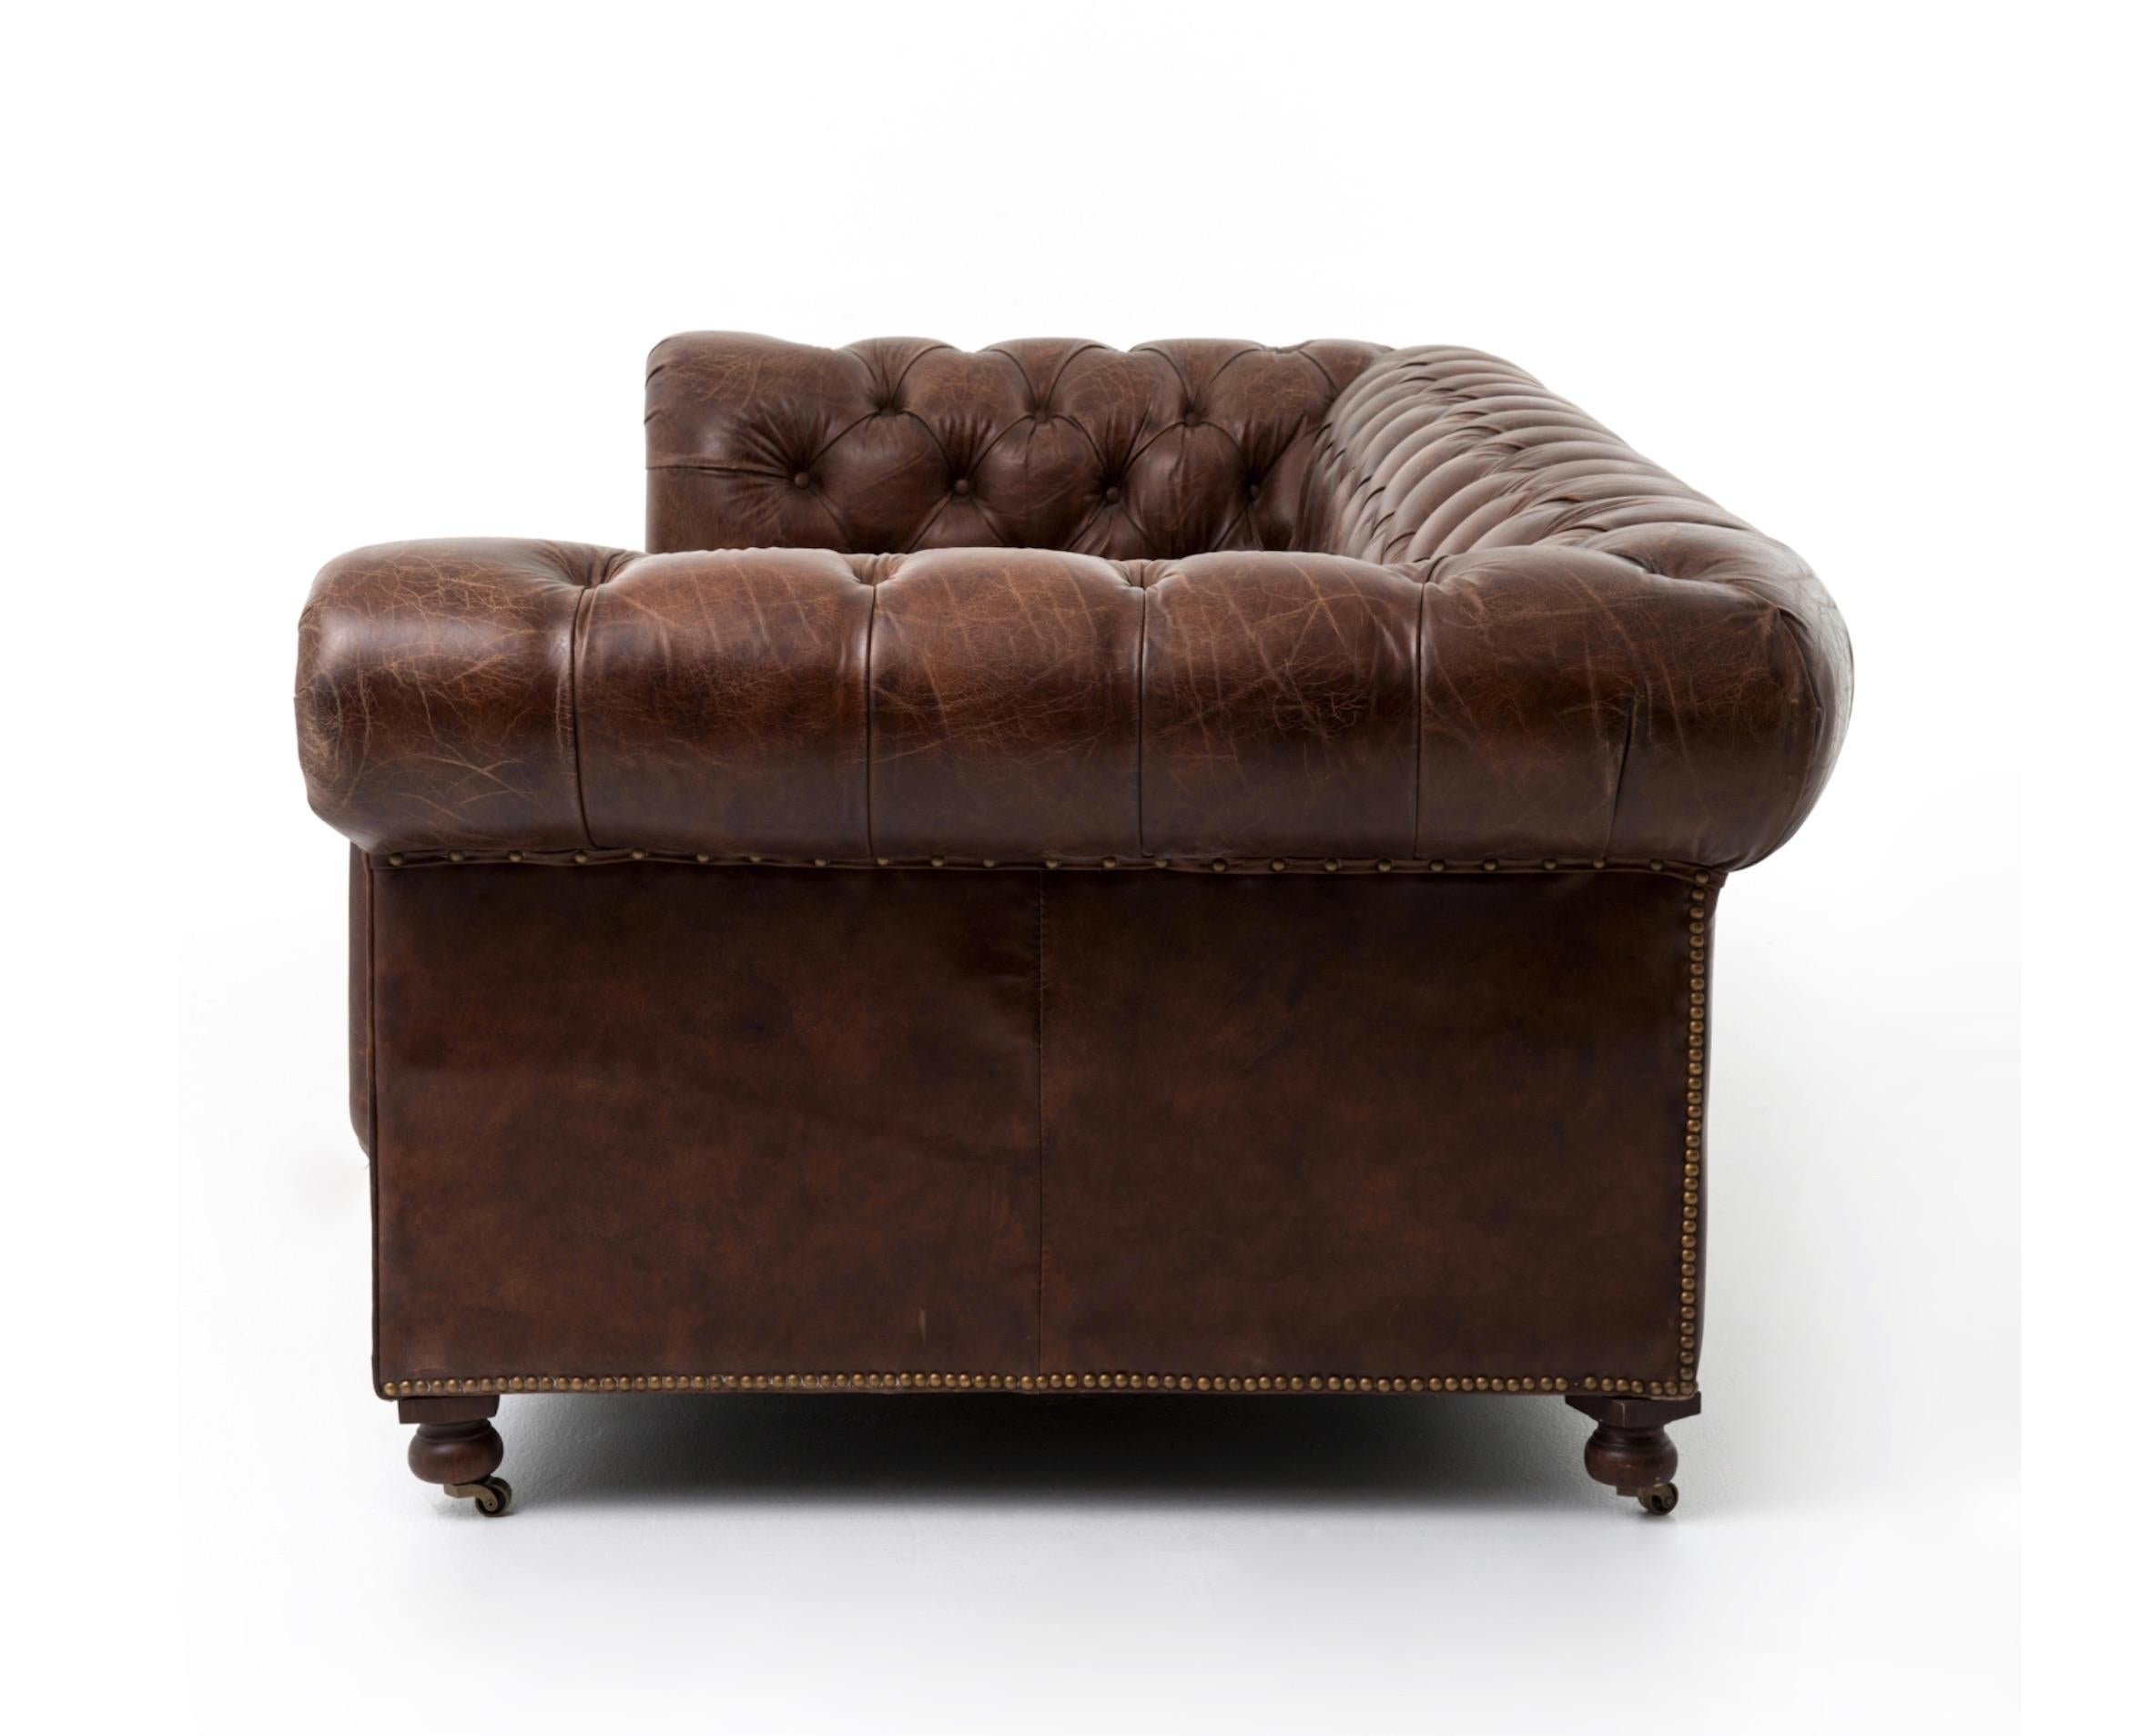 One Pair of Two-Seat Chesterfield Sofa's, Great Scale for Comfort, Great Patina For Sale 1